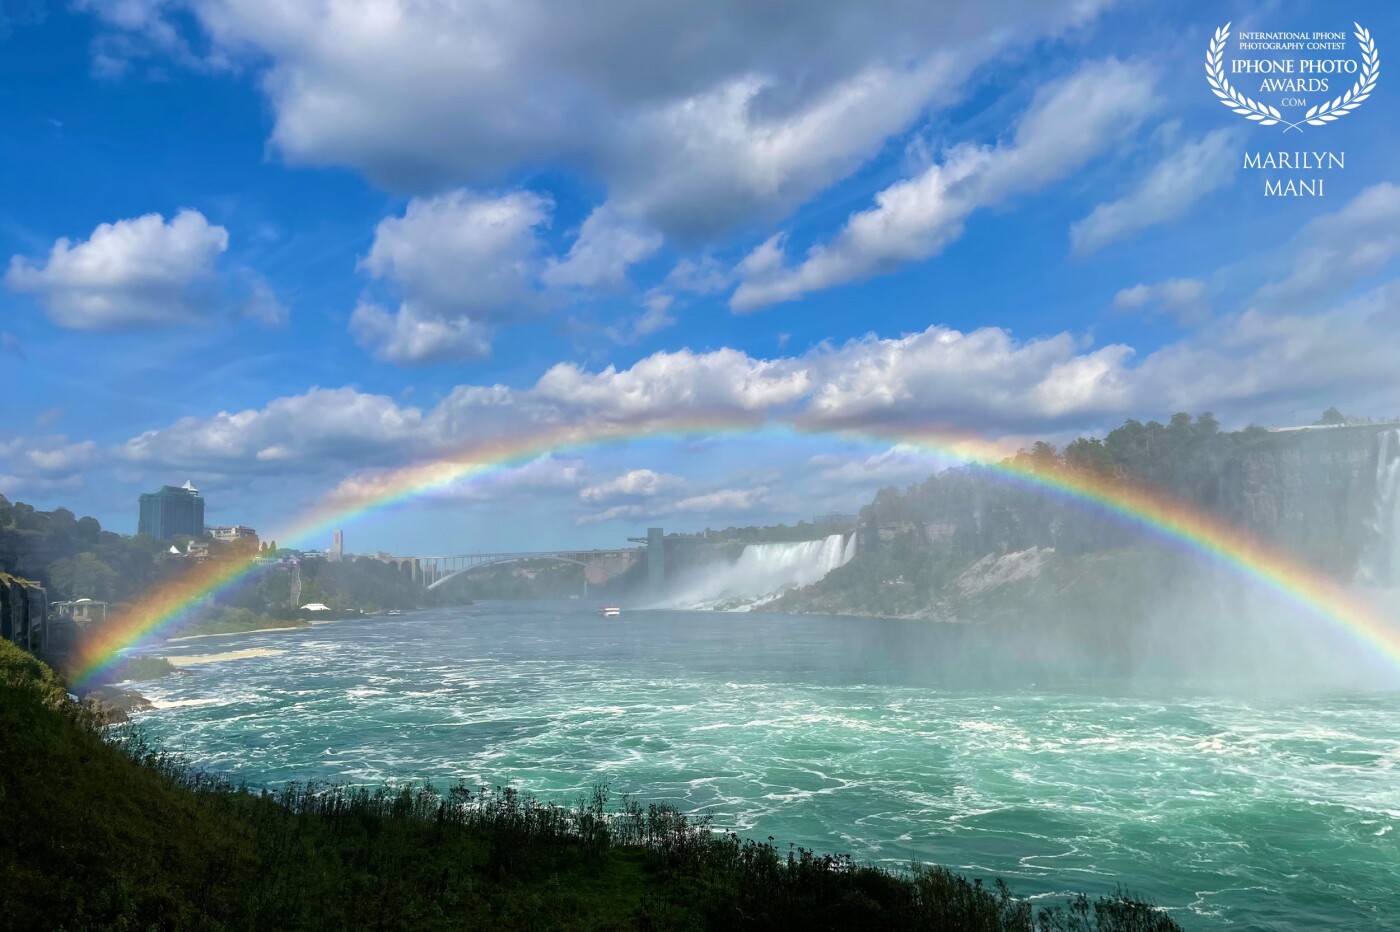 The perfect rainbow captured on a perfect day at the perfect moment at the Niagara Falls, Canada. Being able to capture such magnificent gifts of nature is what I cherish as a photographer.